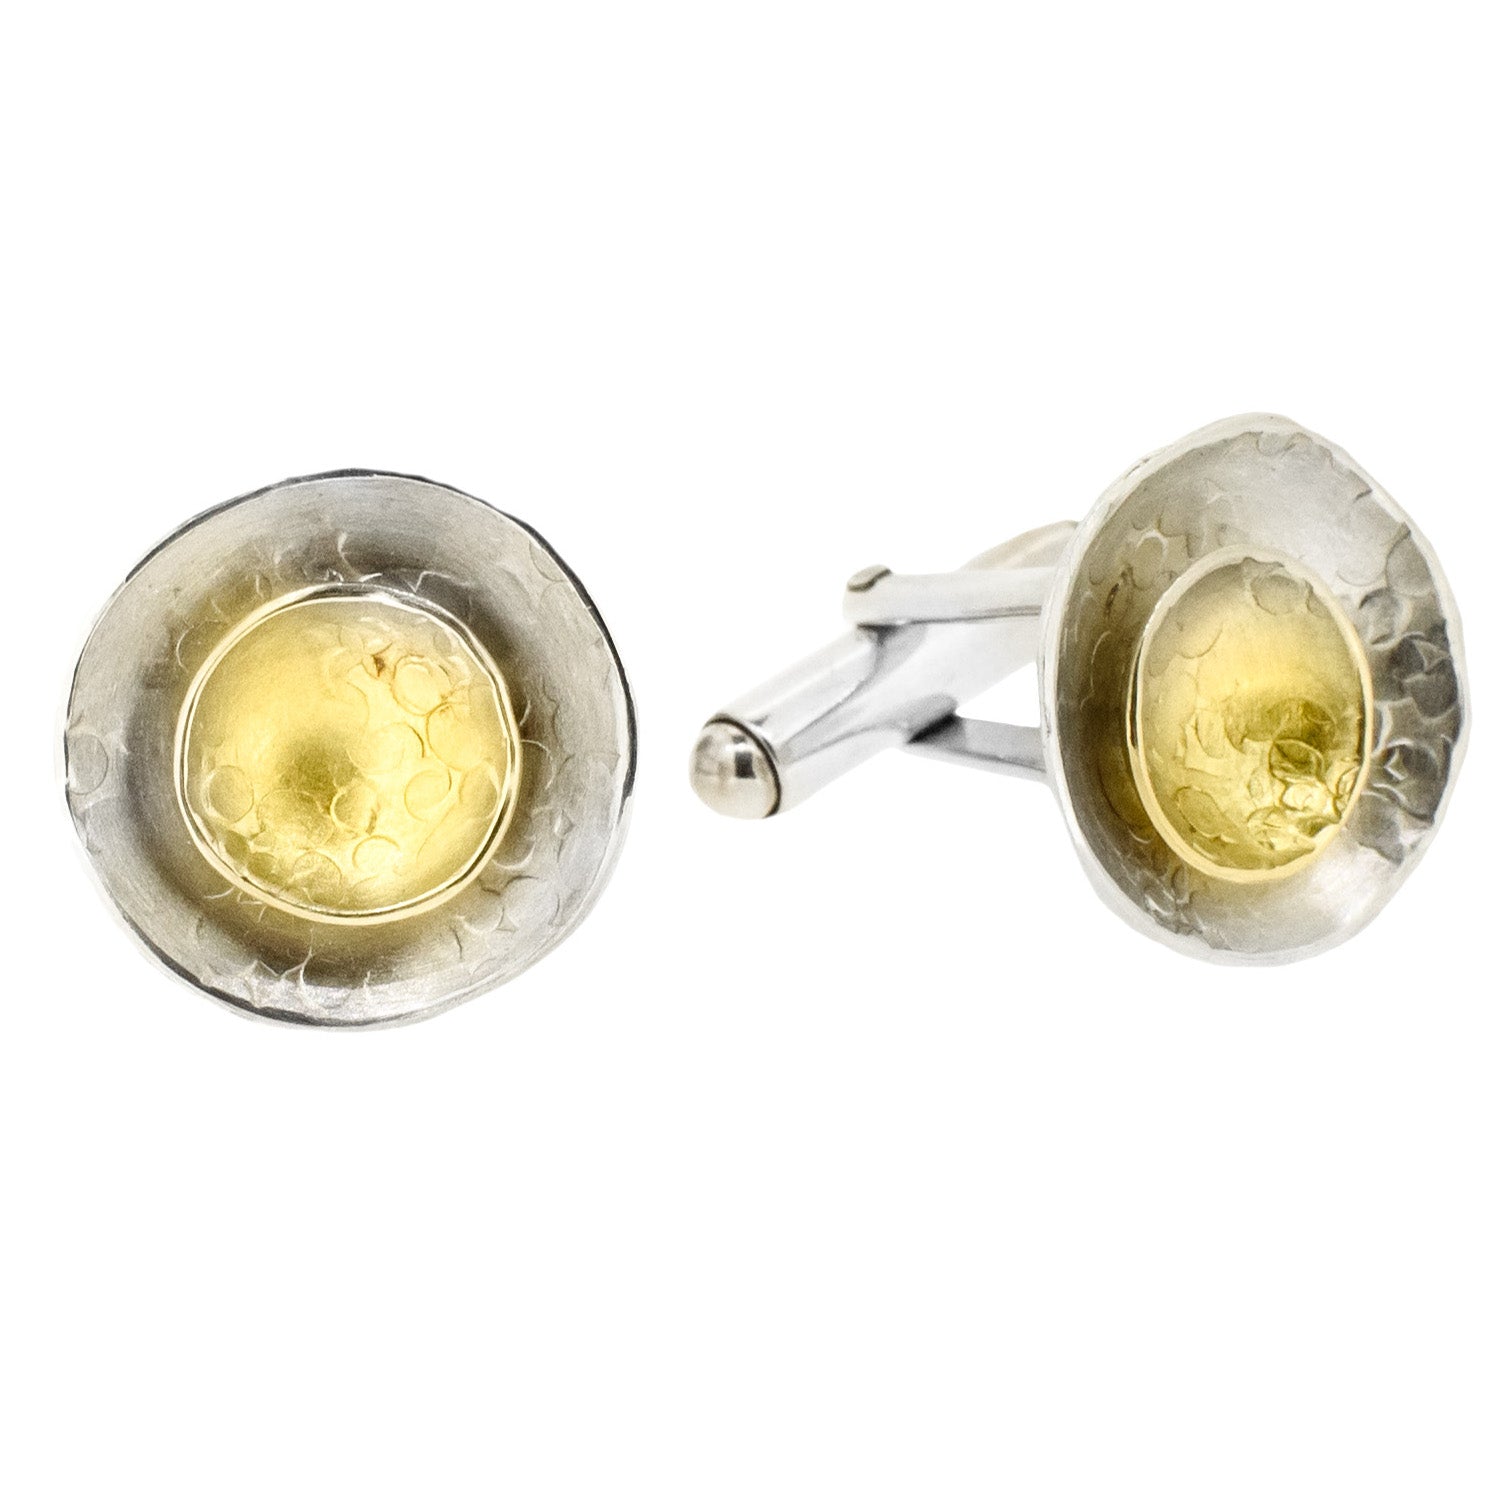 Silver and Gold Cufflinks